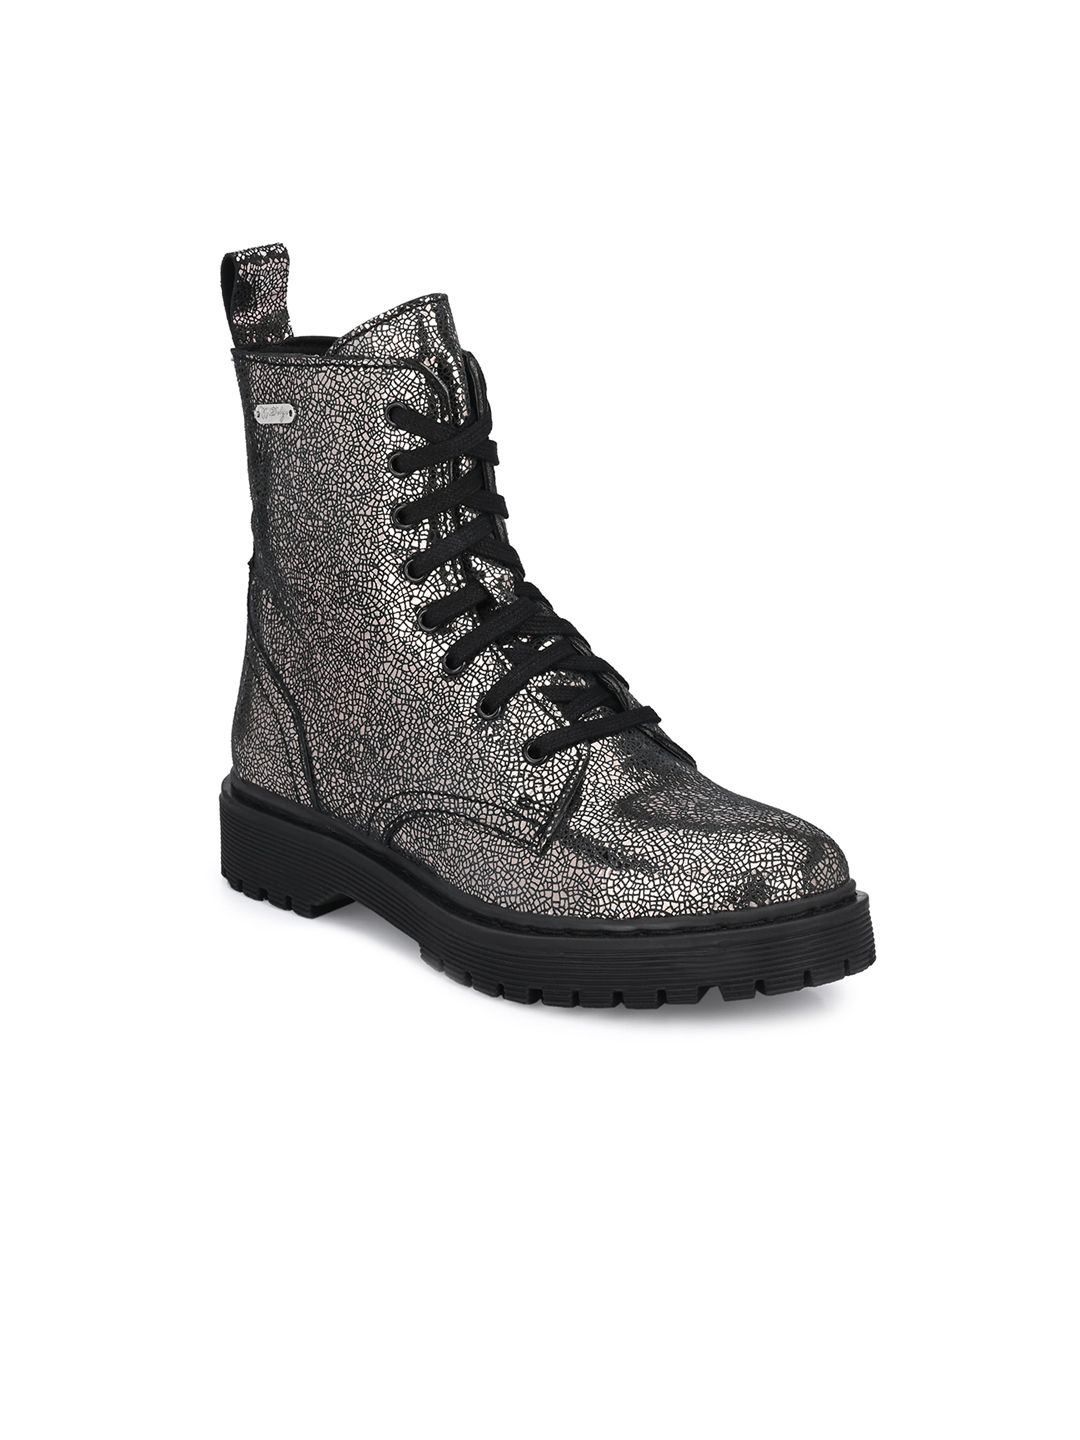 Delize Grey Printed Leather High-Top Wedge Heeled Boots Price in India